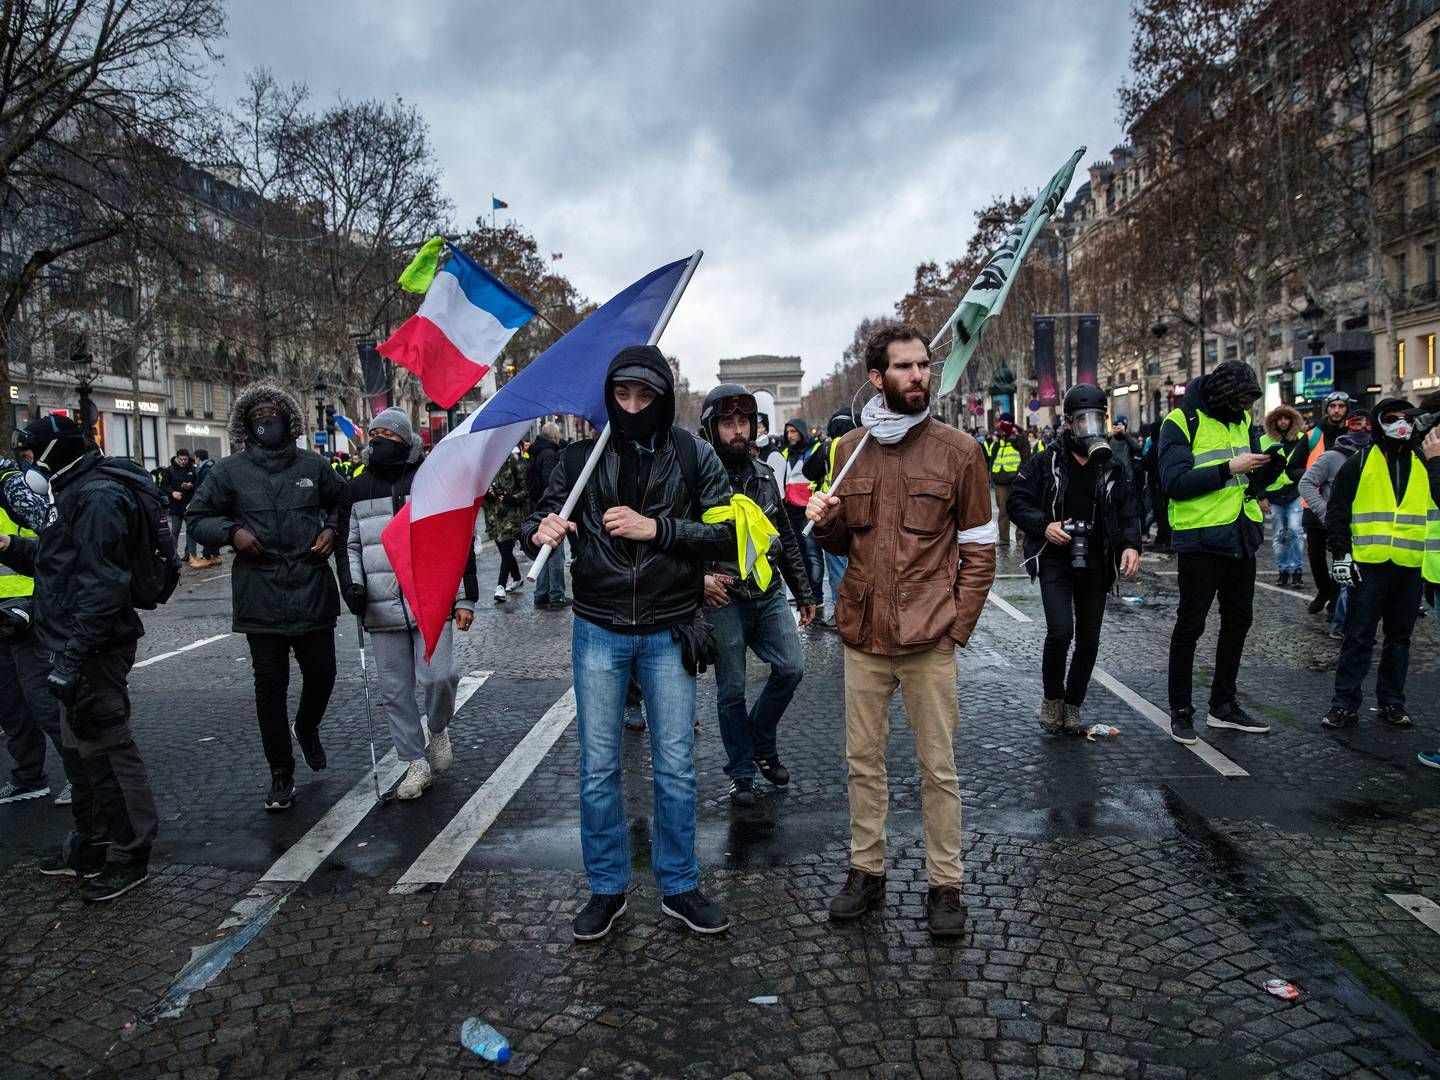 Rising fuel prices in France in 2018 led to demonstrations and the "Yellow Vests" movement. | Photo: Jacob Ehrbahn